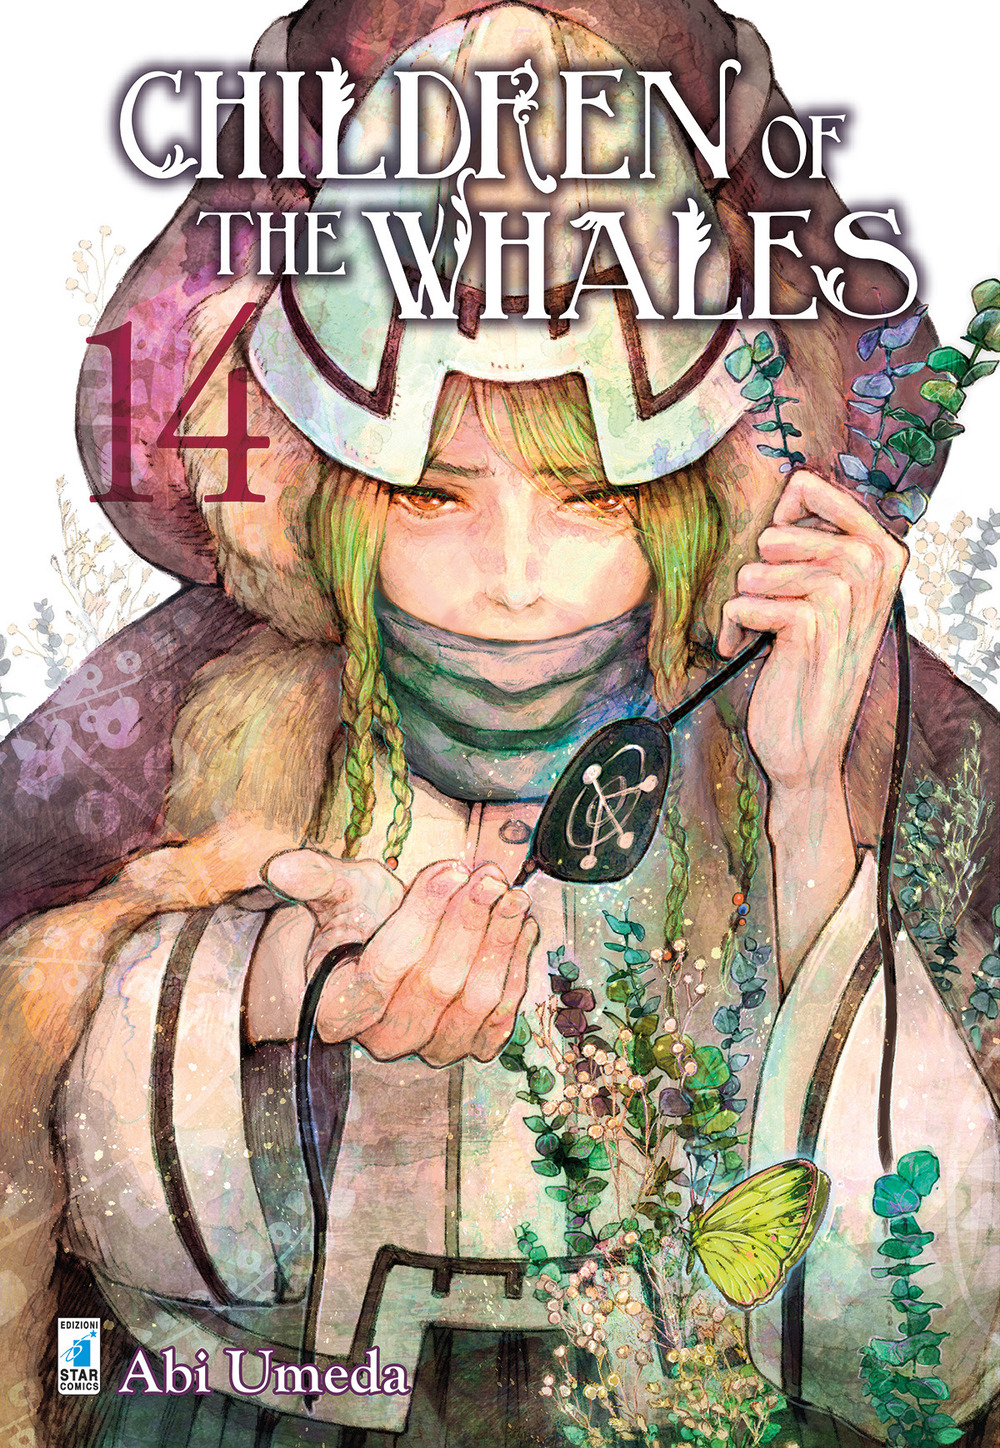 Children of the whales. Vol. 14